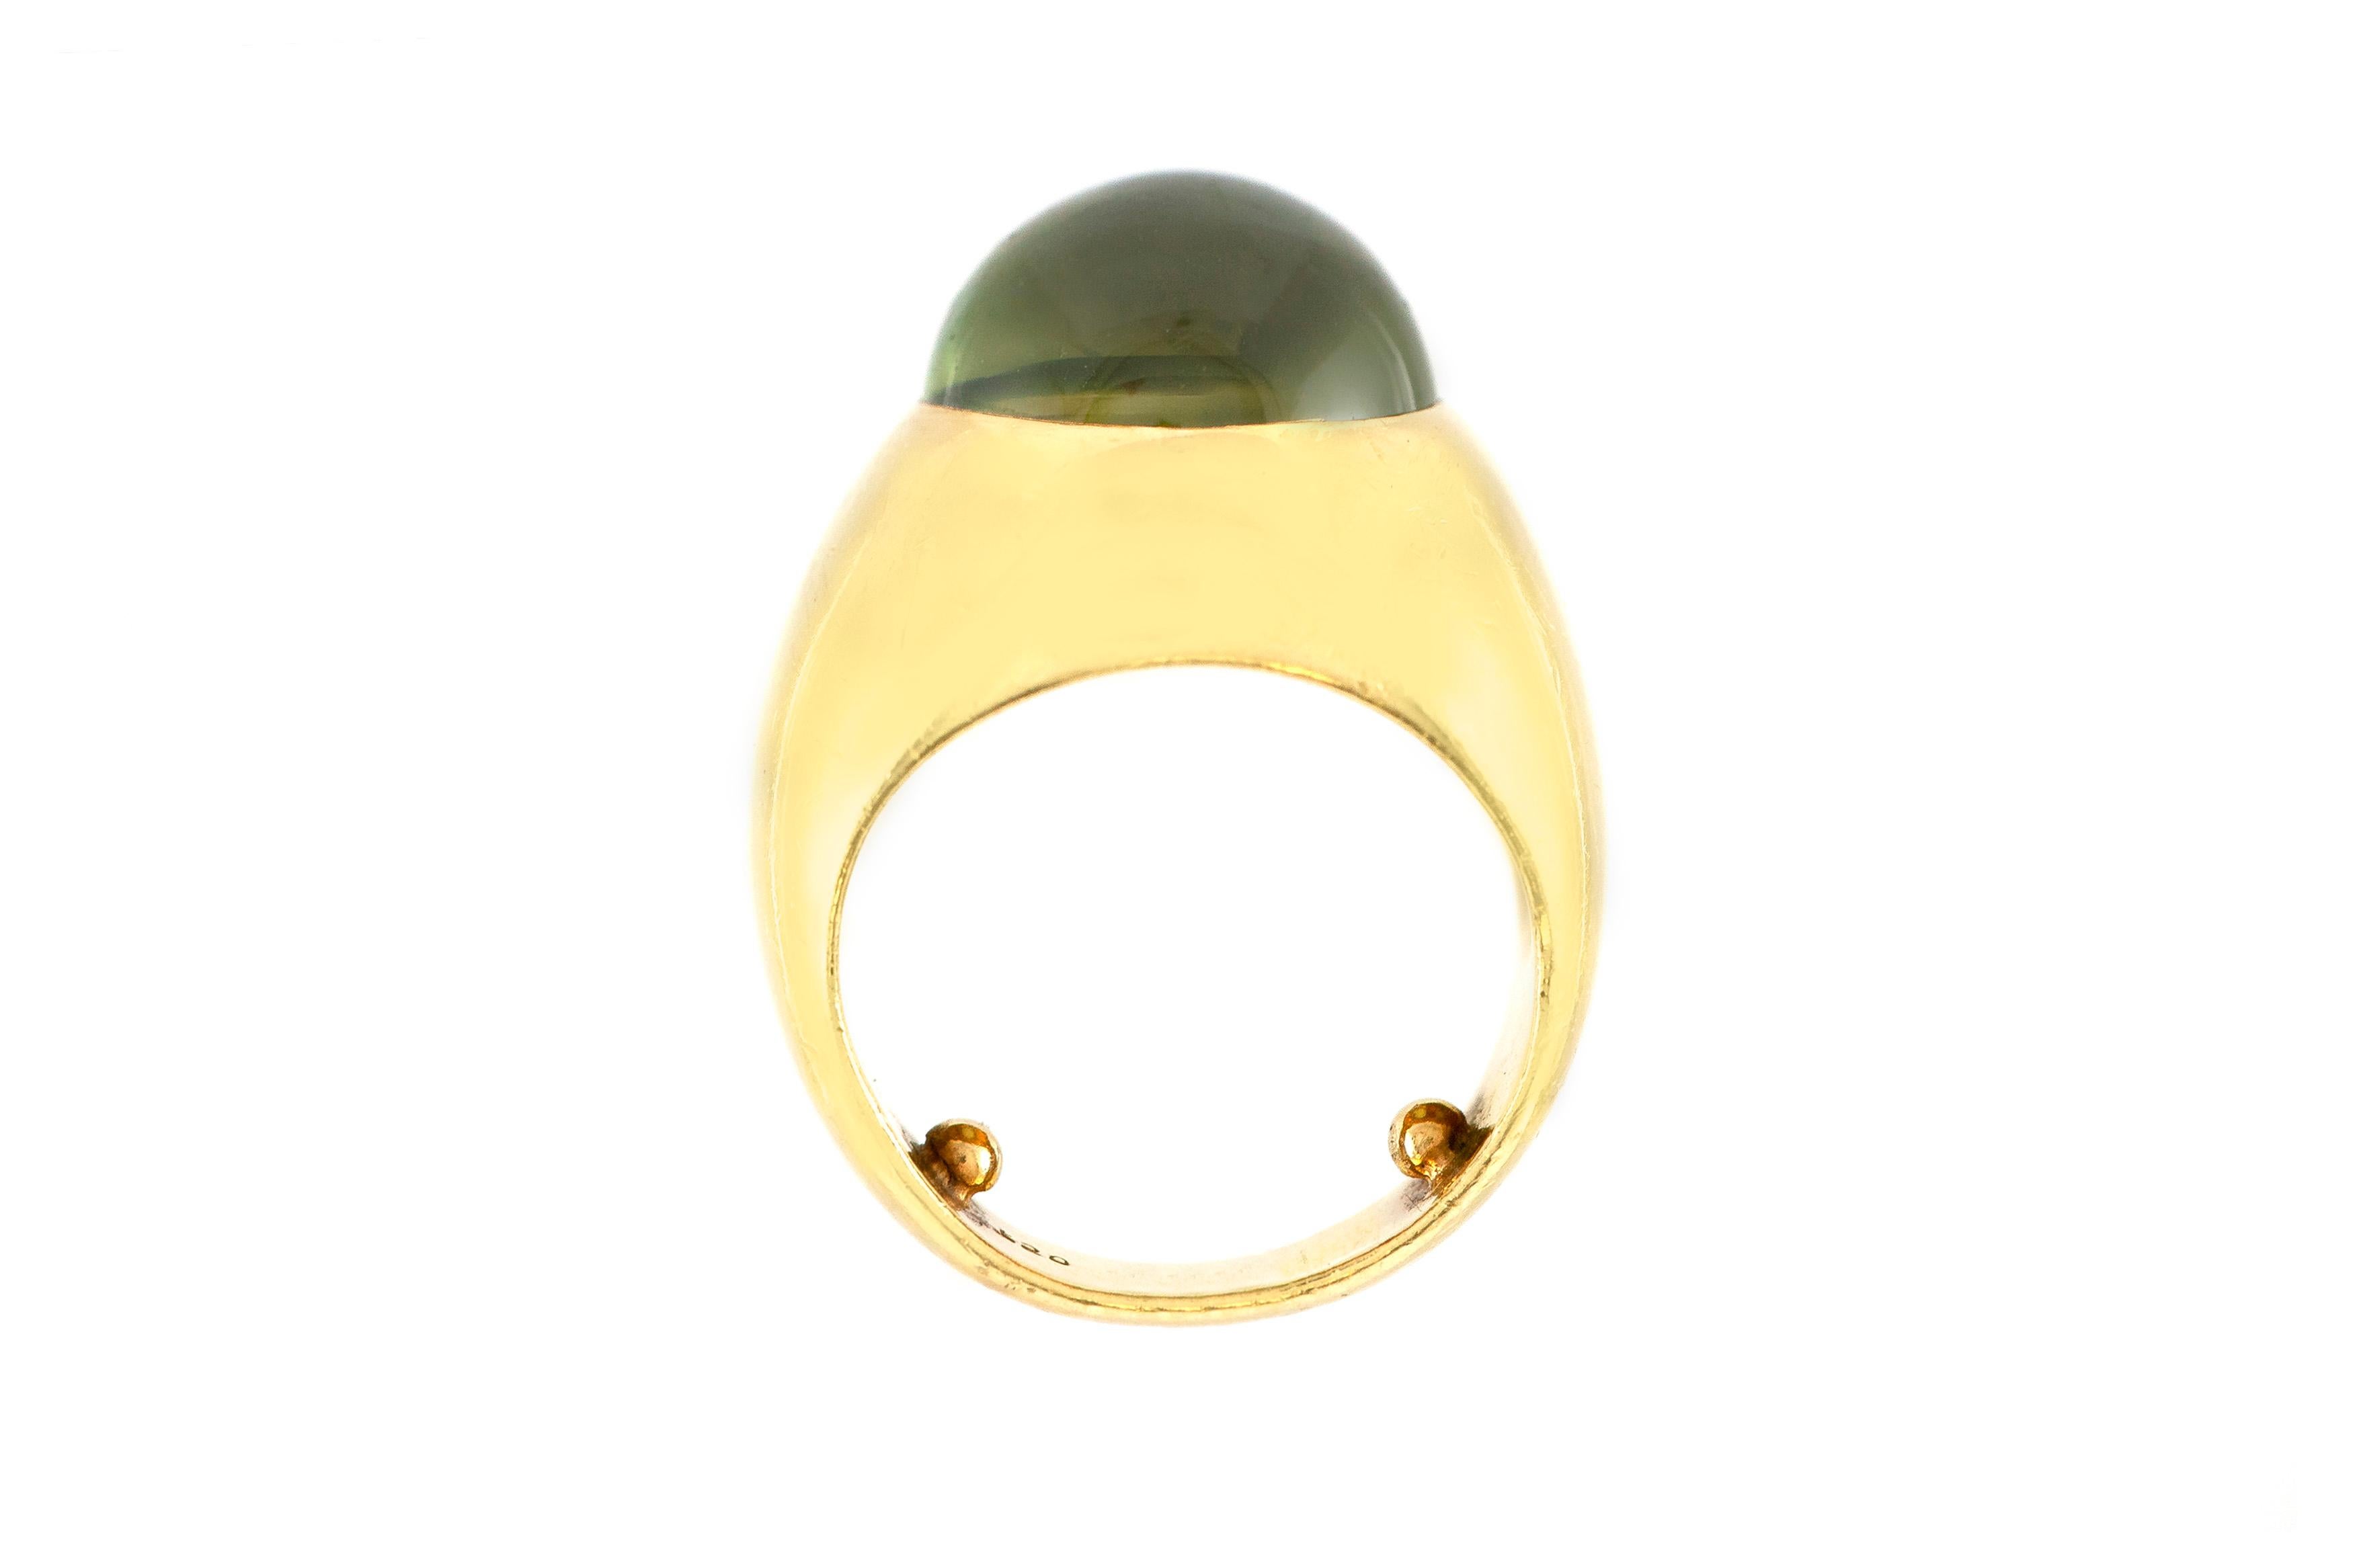 The ring is finely crafted in 18k yellow gold with center stone oval cabochon cat eye ring weighing approximately total of 15.00 carat.